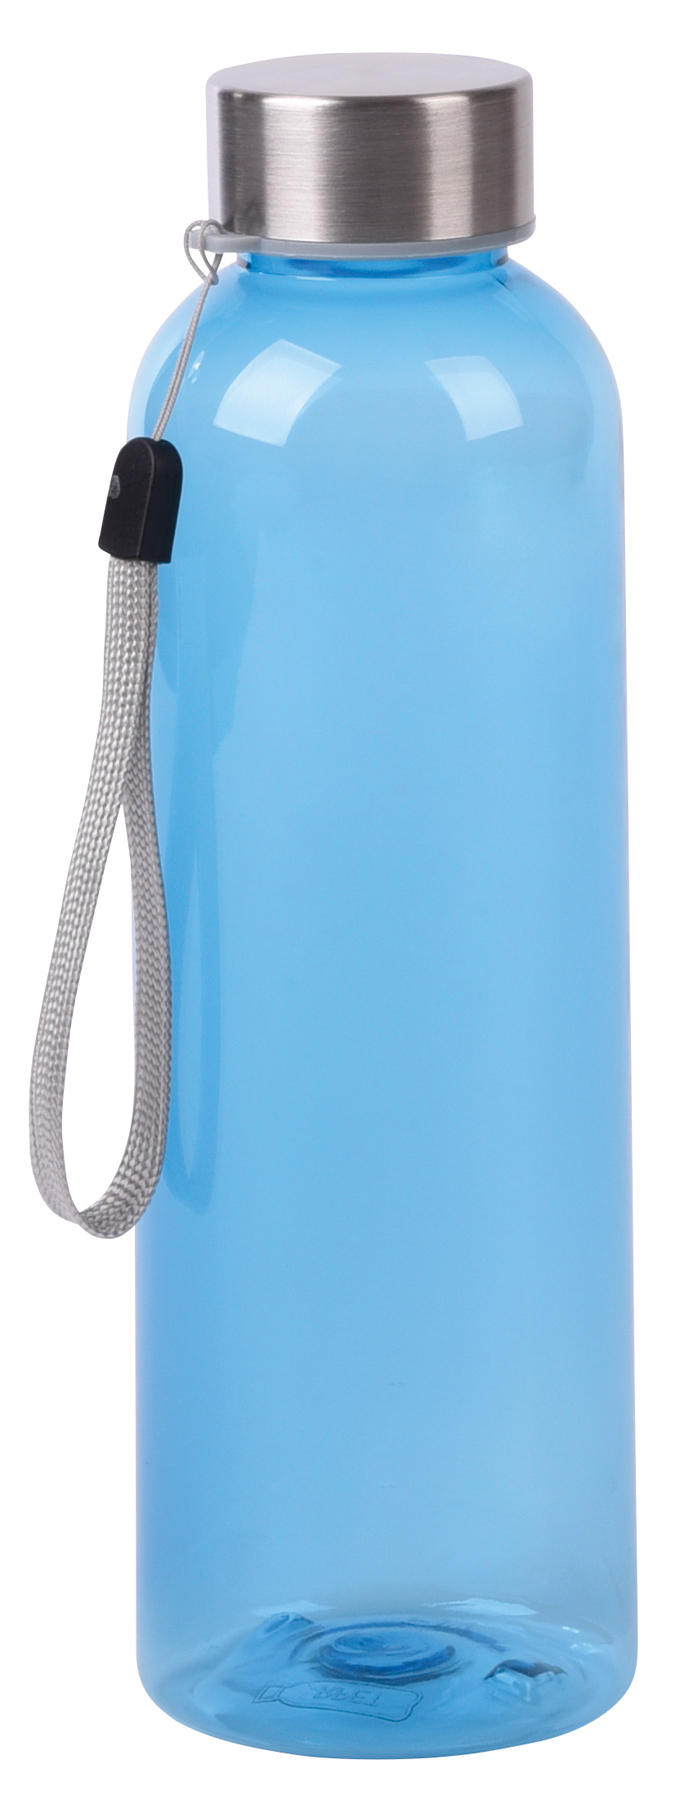 Drinking bottle SIMPLE ECO - baby blue